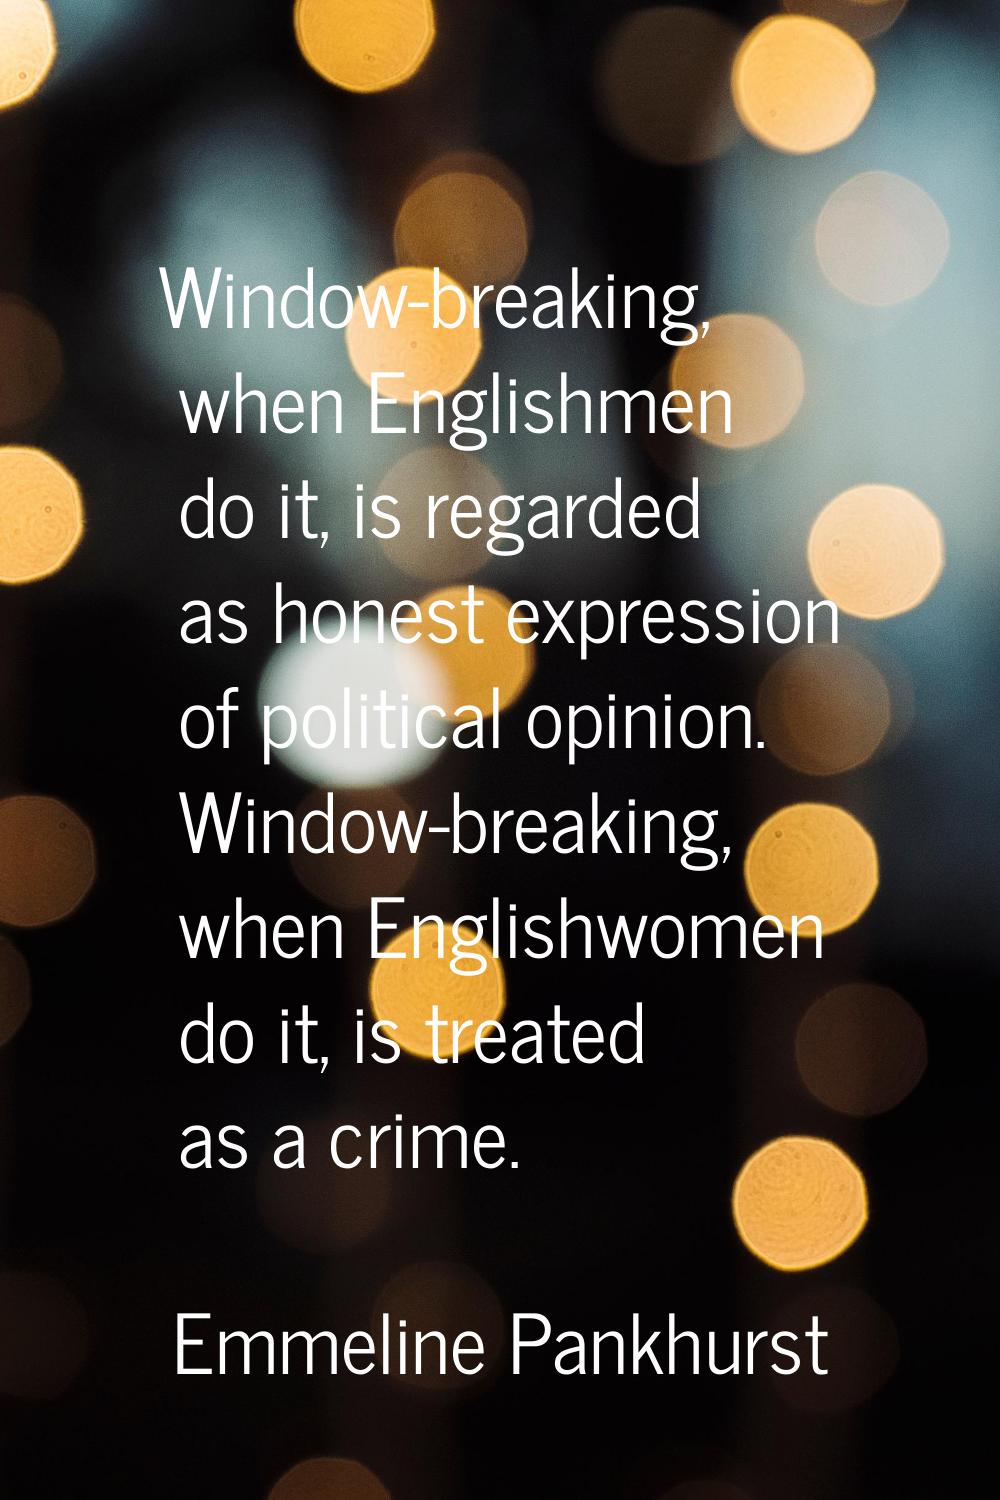 Window-breaking, when Englishmen do it, is regarded as honest expression of political opinion. Wind